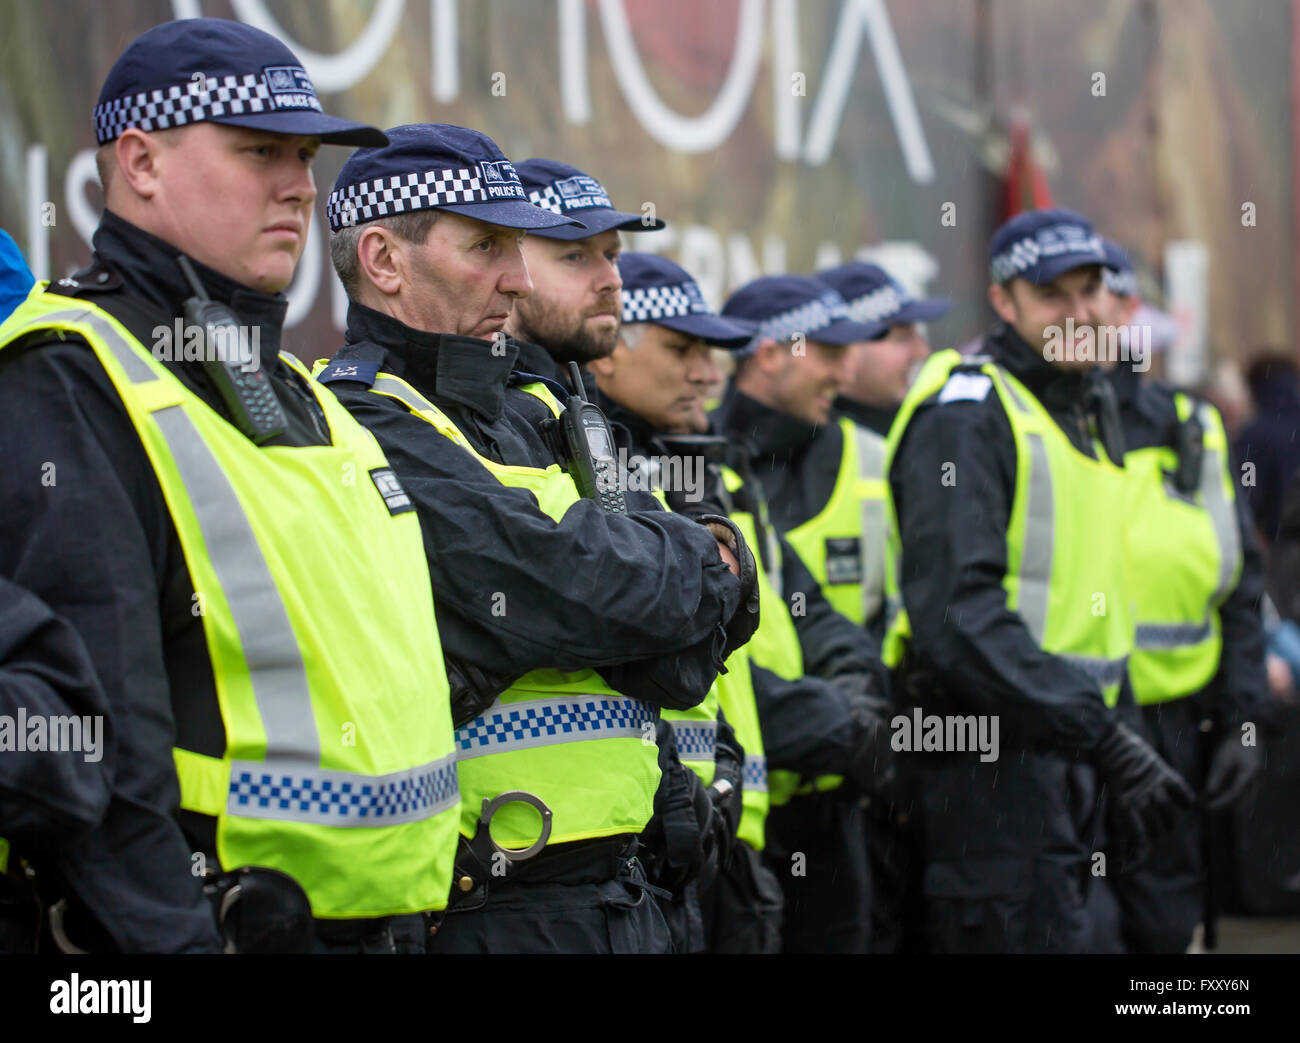 Police were present in large numbers to oversee the anti-austerity march Stock Photo